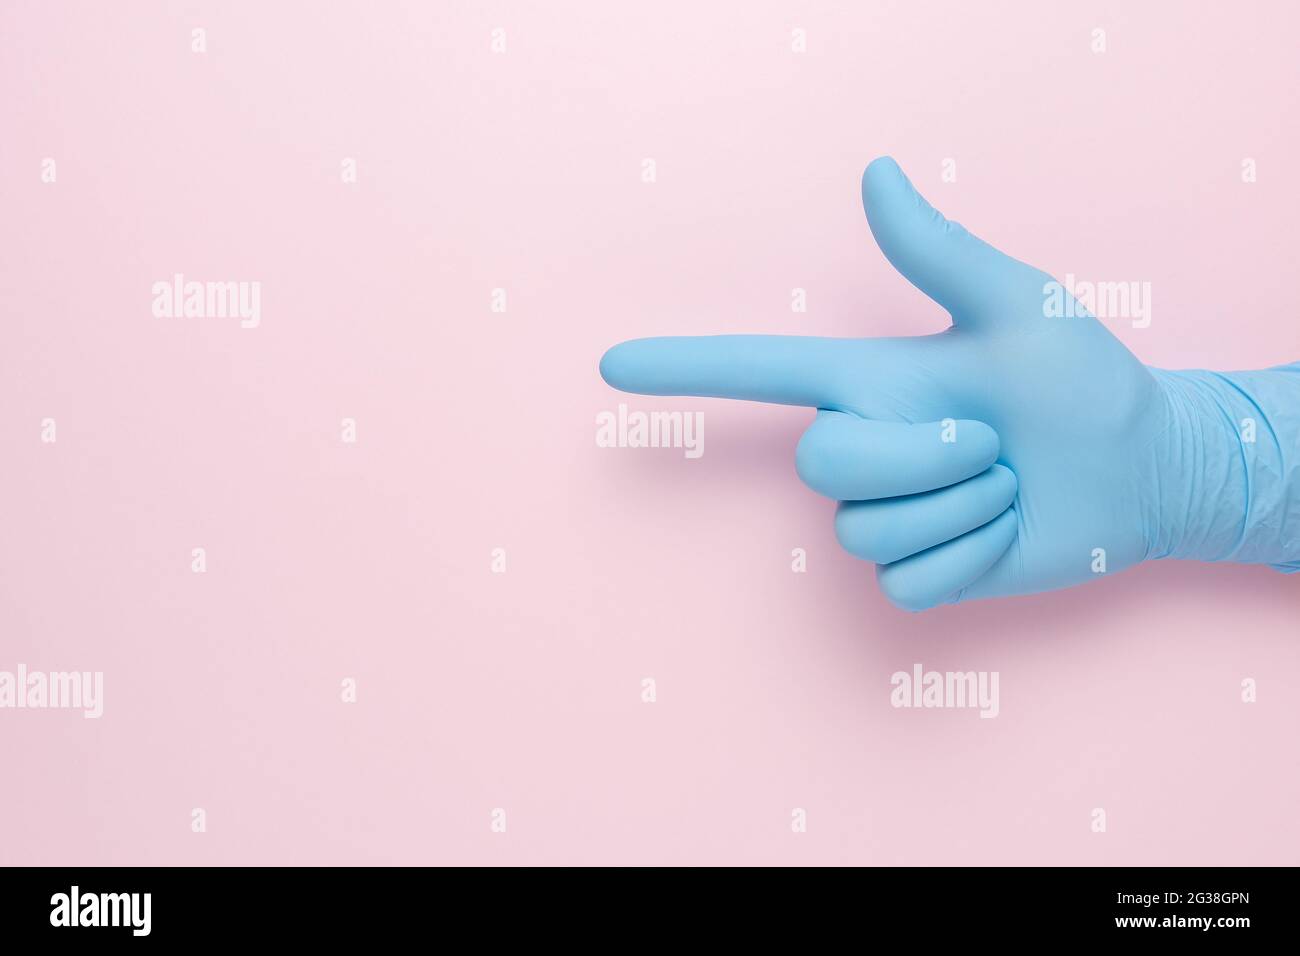 Hand in the blue glove depicts the gesture of a handgun on pink background. Minimal flat lay concept. Stock Photo